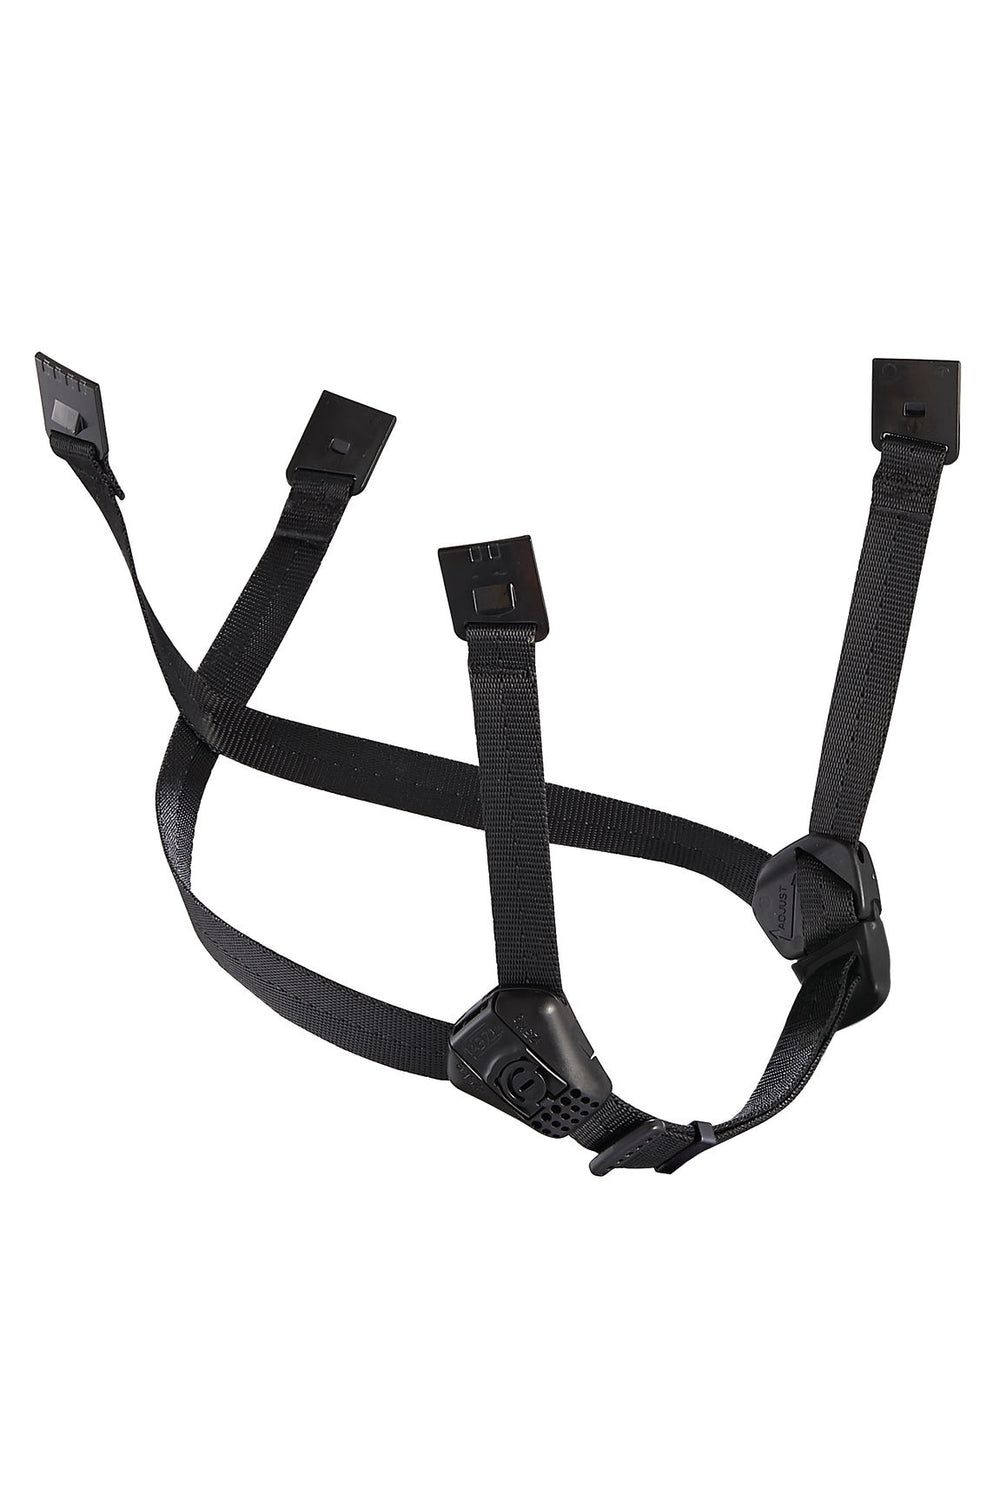 Petzl - Dual Chinstrap for Vertex and Strato Helmets